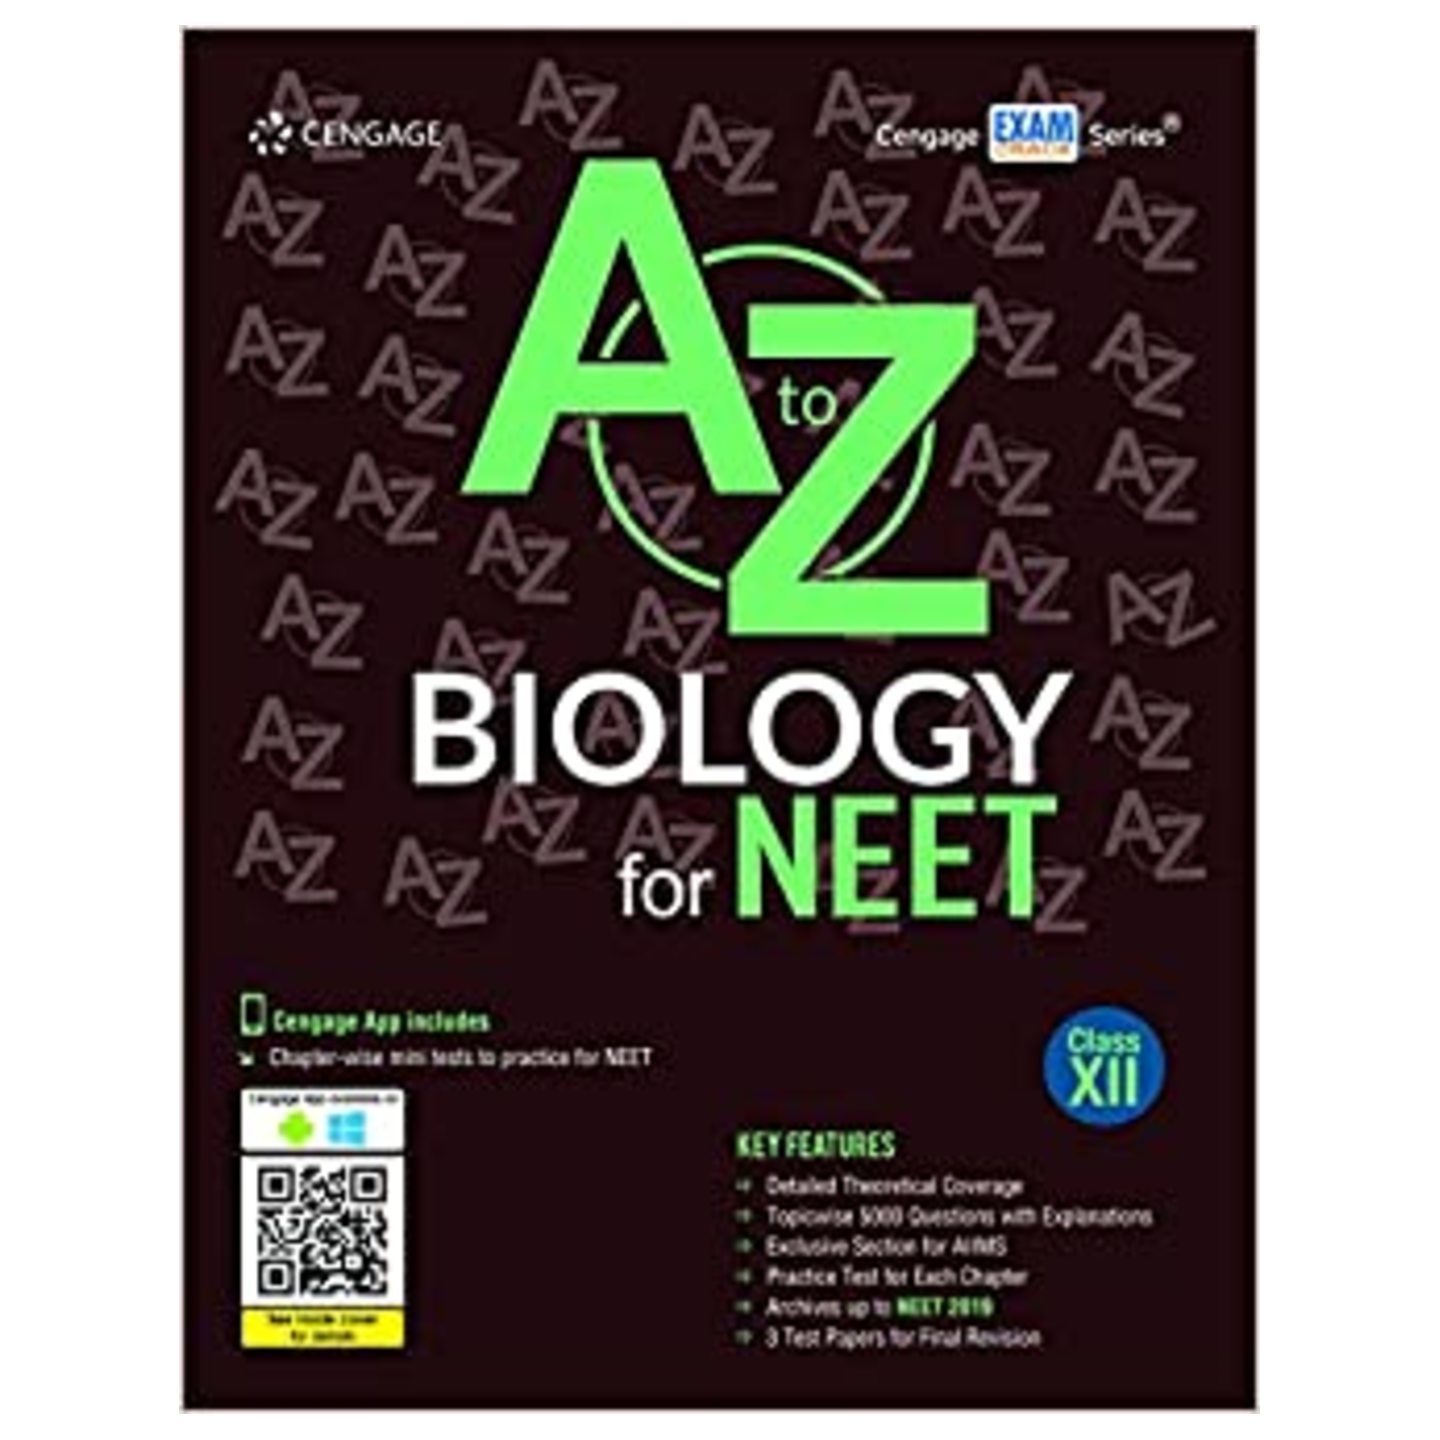 CENGAGE A to Z Biology for NEET Class XII